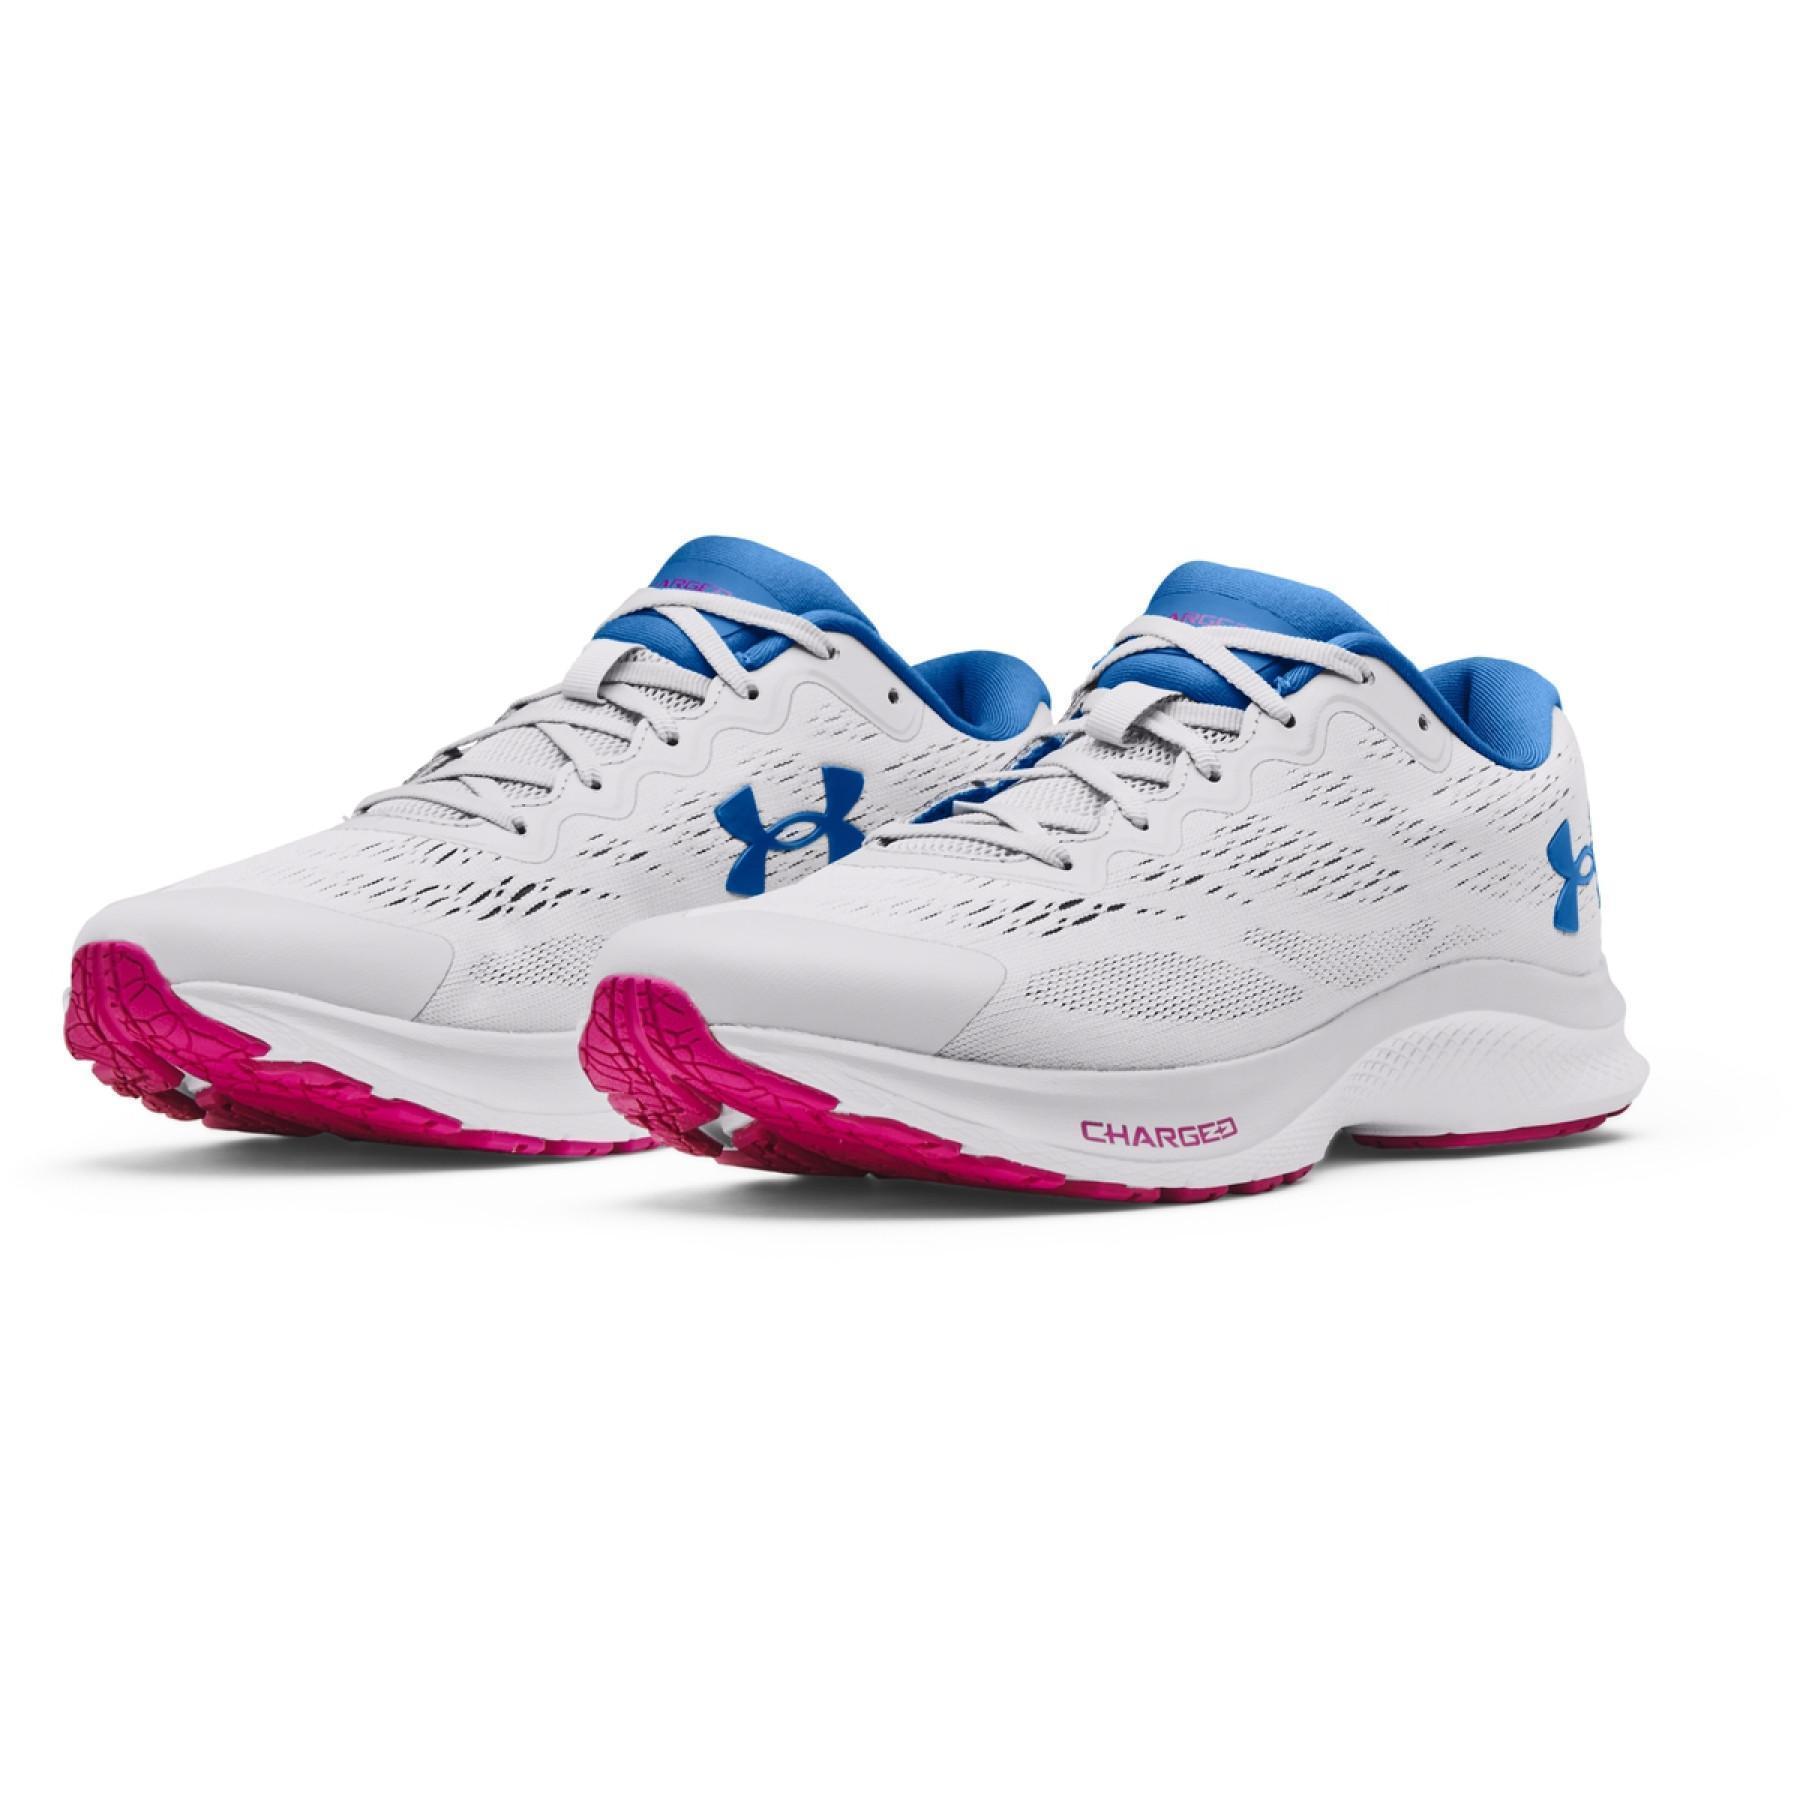 Zapatillas de running para mujer Under Armour Charged Bandit 6